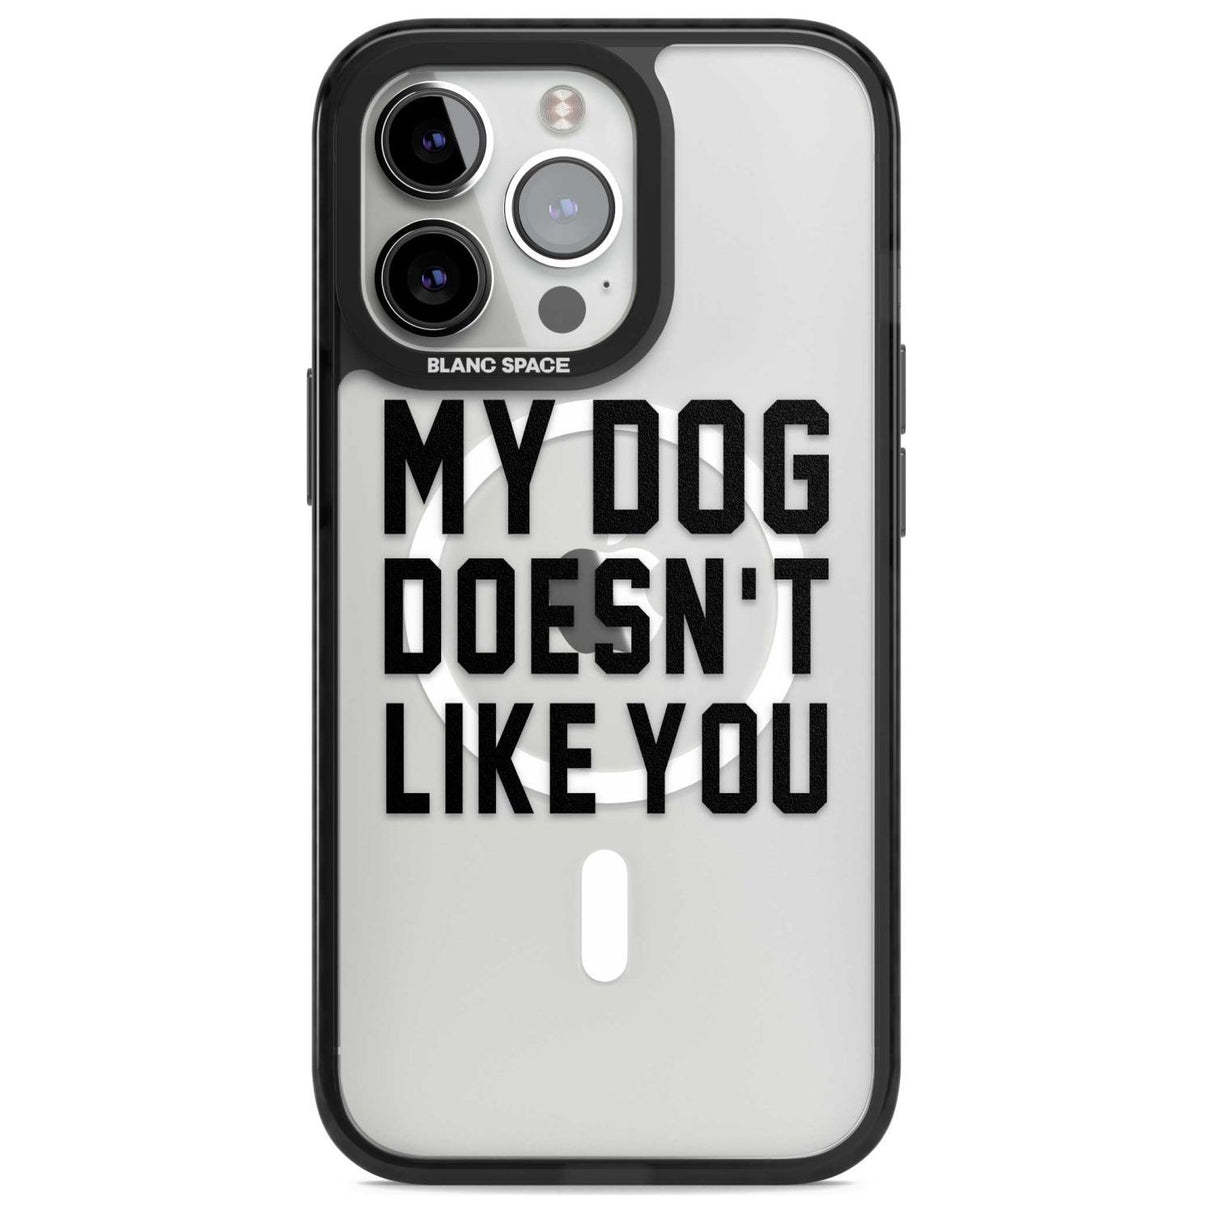 Dog Doesn't Like You Phone Case iPhone 15 Pro Max / Magsafe Black Impact Case,iPhone 15 Pro / Magsafe Black Impact Case,iPhone 14 Pro Max / Magsafe Black Impact Case,iPhone 14 Pro / Magsafe Black Impact Case,iPhone 13 Pro / Magsafe Black Impact Case Blanc Space